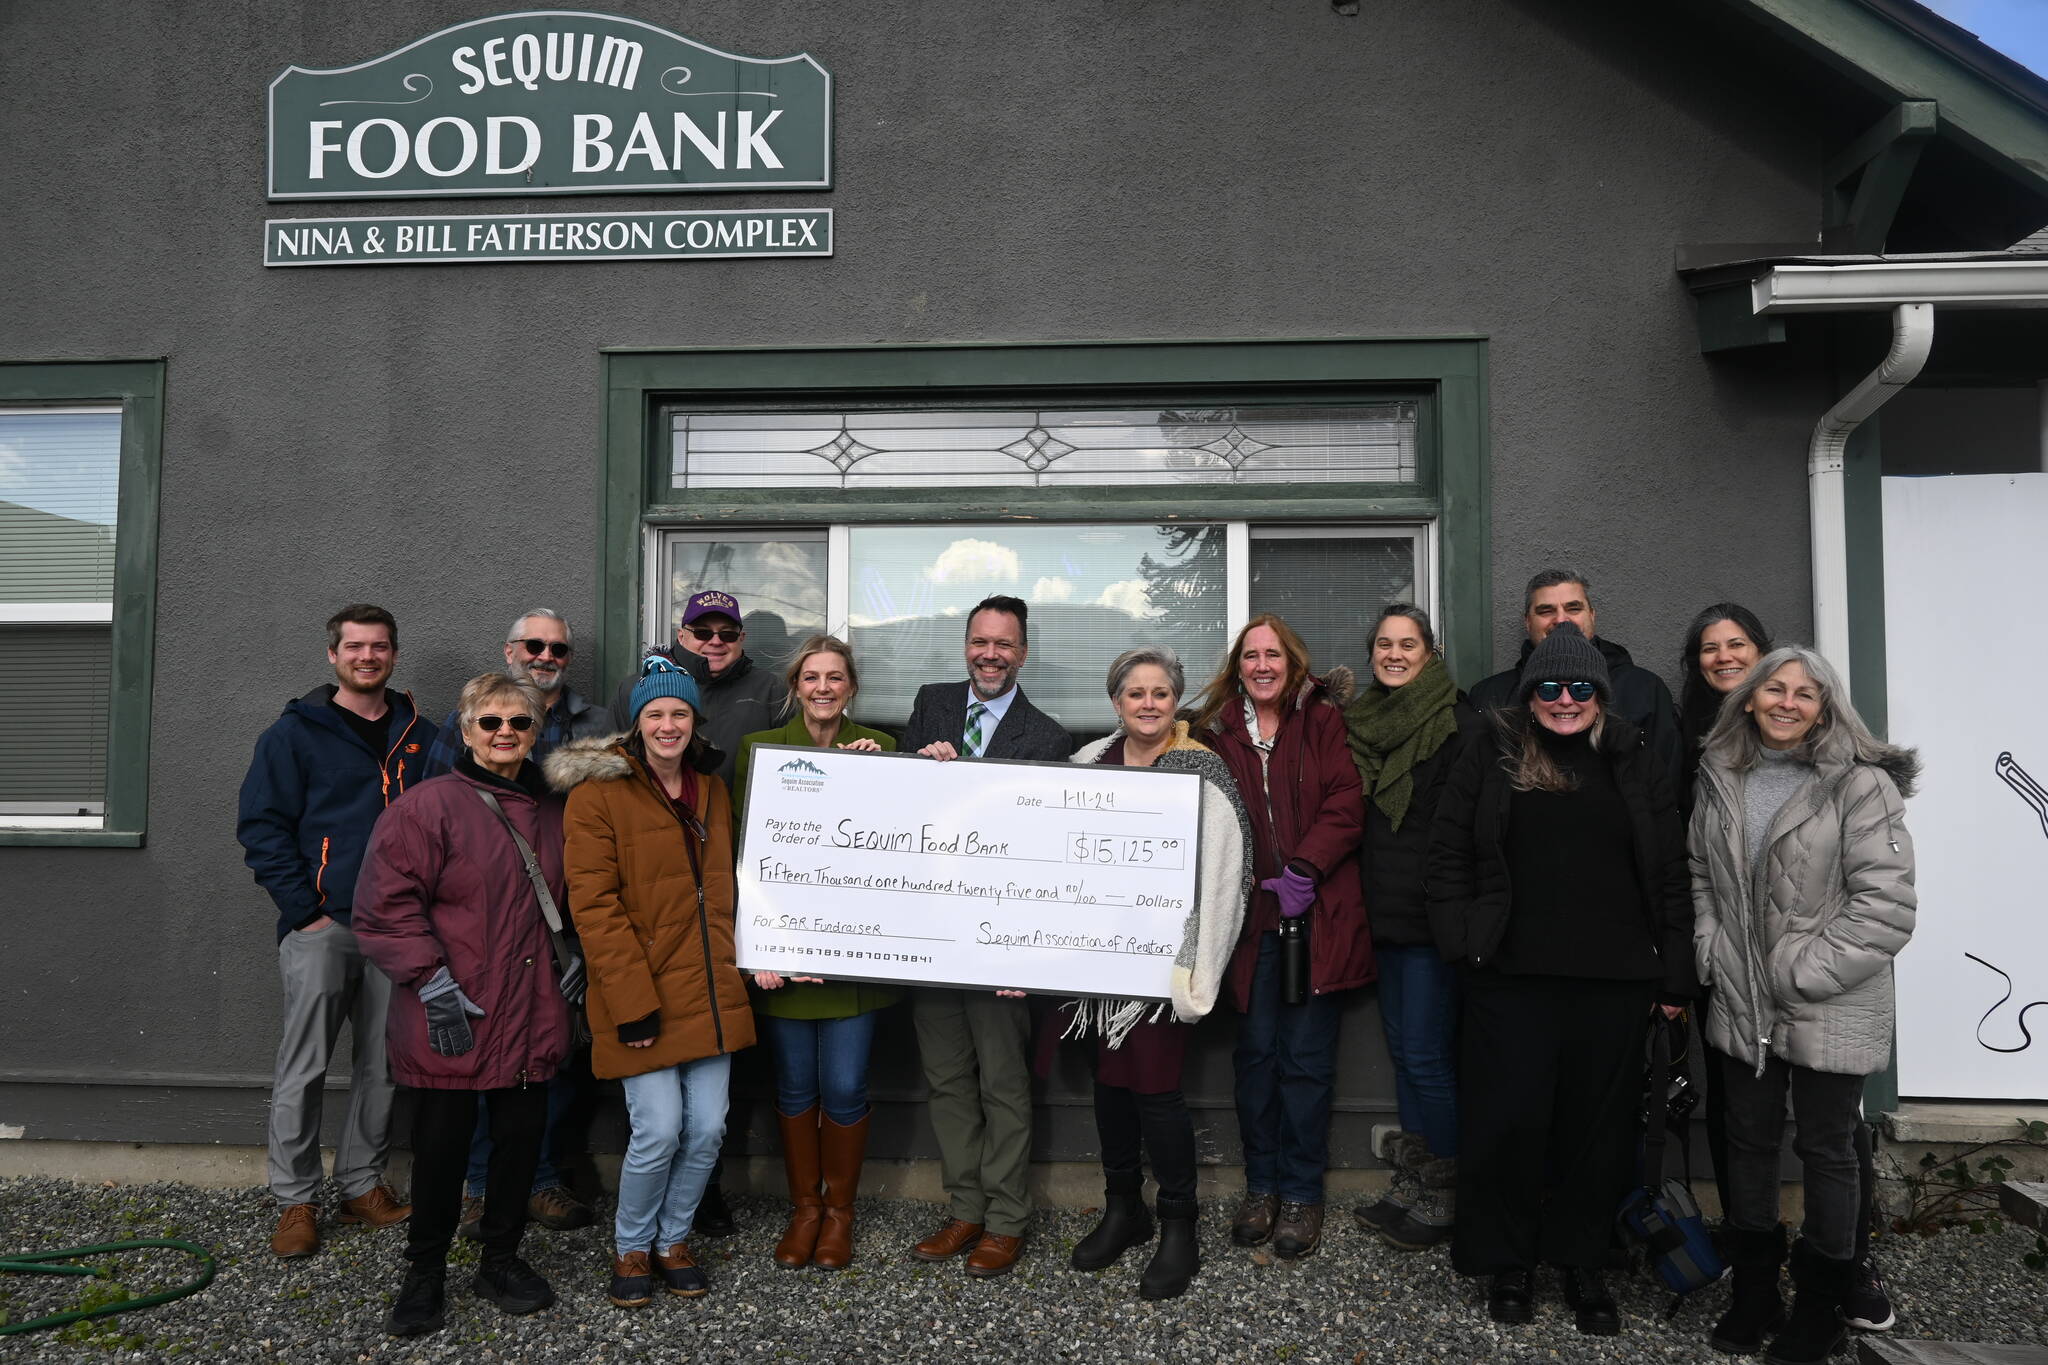 Sequim Gazette photo by Michael Dashiell / Locals in needs of food assistance got another boost from the Sequim Association of Realtors, who in January presented Sequim Food Bank representatives with a check for more than $15,000 collected during their annual Holiday Fundraiser. Presenting the funds in mid-January, are (back row, from left) Matt Holland, Tyler Conkle and Stu Marcy, (middle row, from left) Linda French, Lily Todd, Katie Marble, Nikki Stevenson, Craig Stevenson, Sequim Food Bank director Andra Smith, Marguerite Glover, Kaylene Byrne, Kelly O’Mera and FaLeana Wech, and (front row, from left) Julianne Campbell and Catherine Cote.